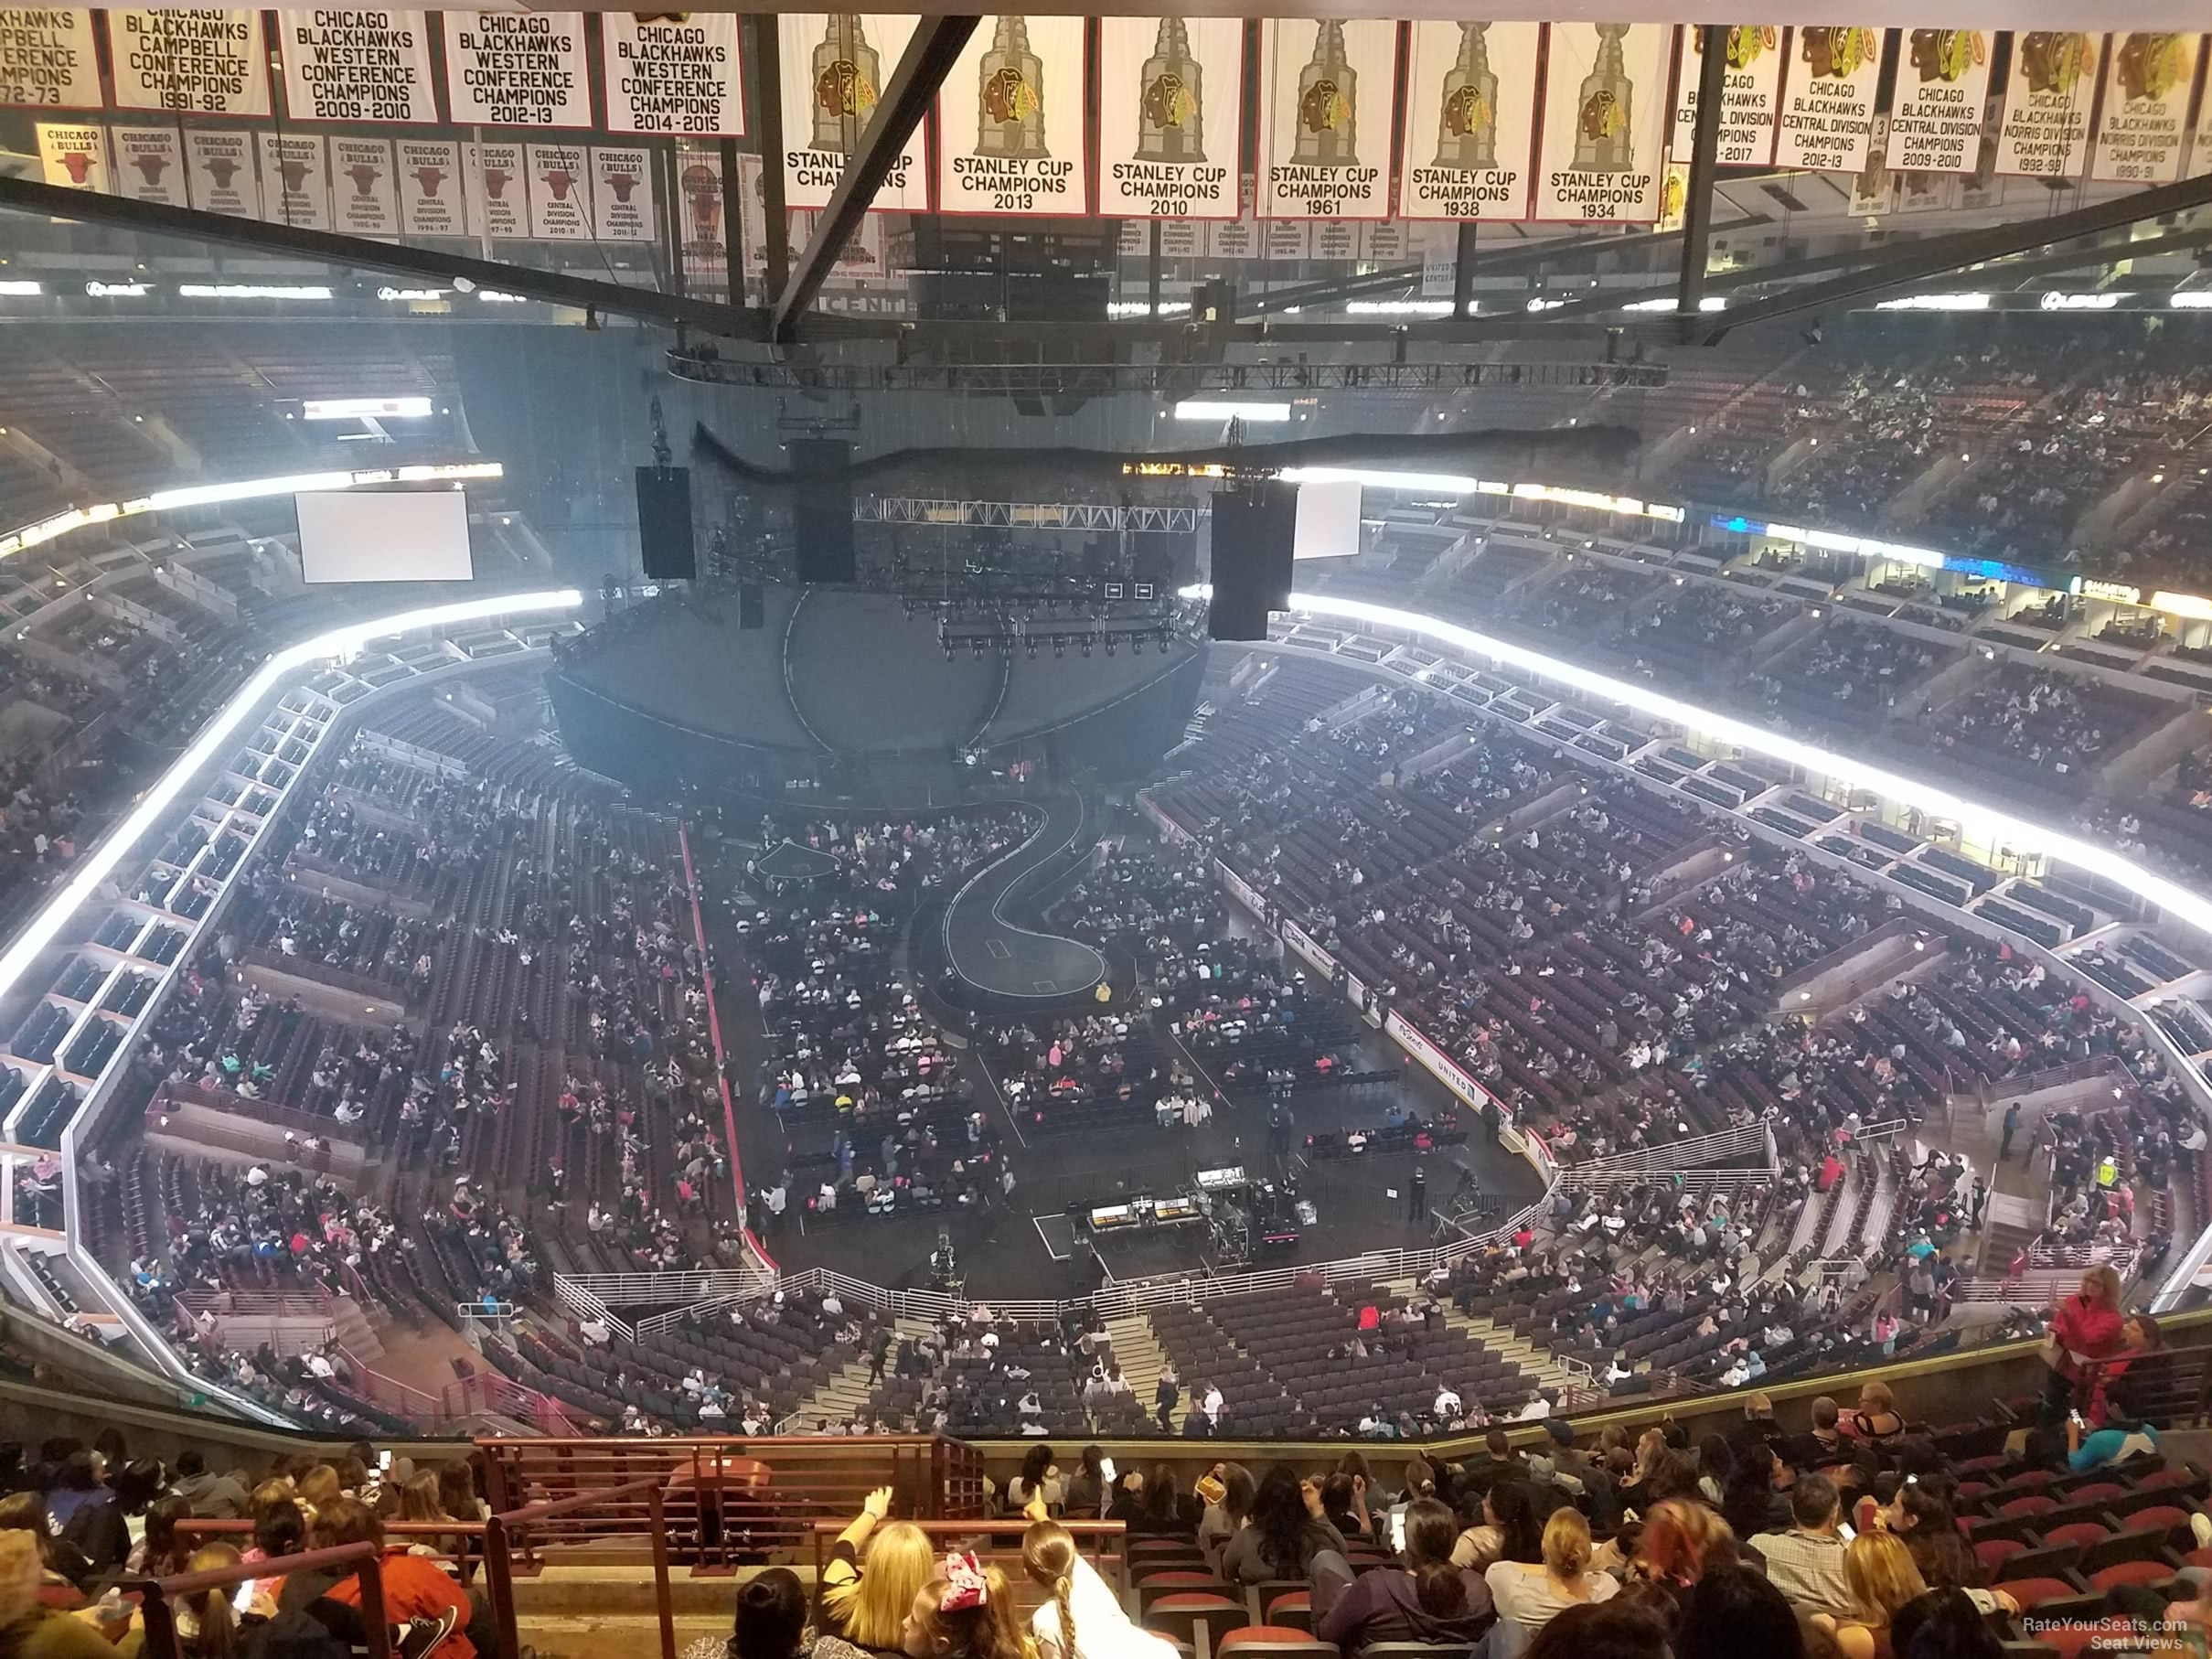 section 310, row 17 seat view  for concert - united center